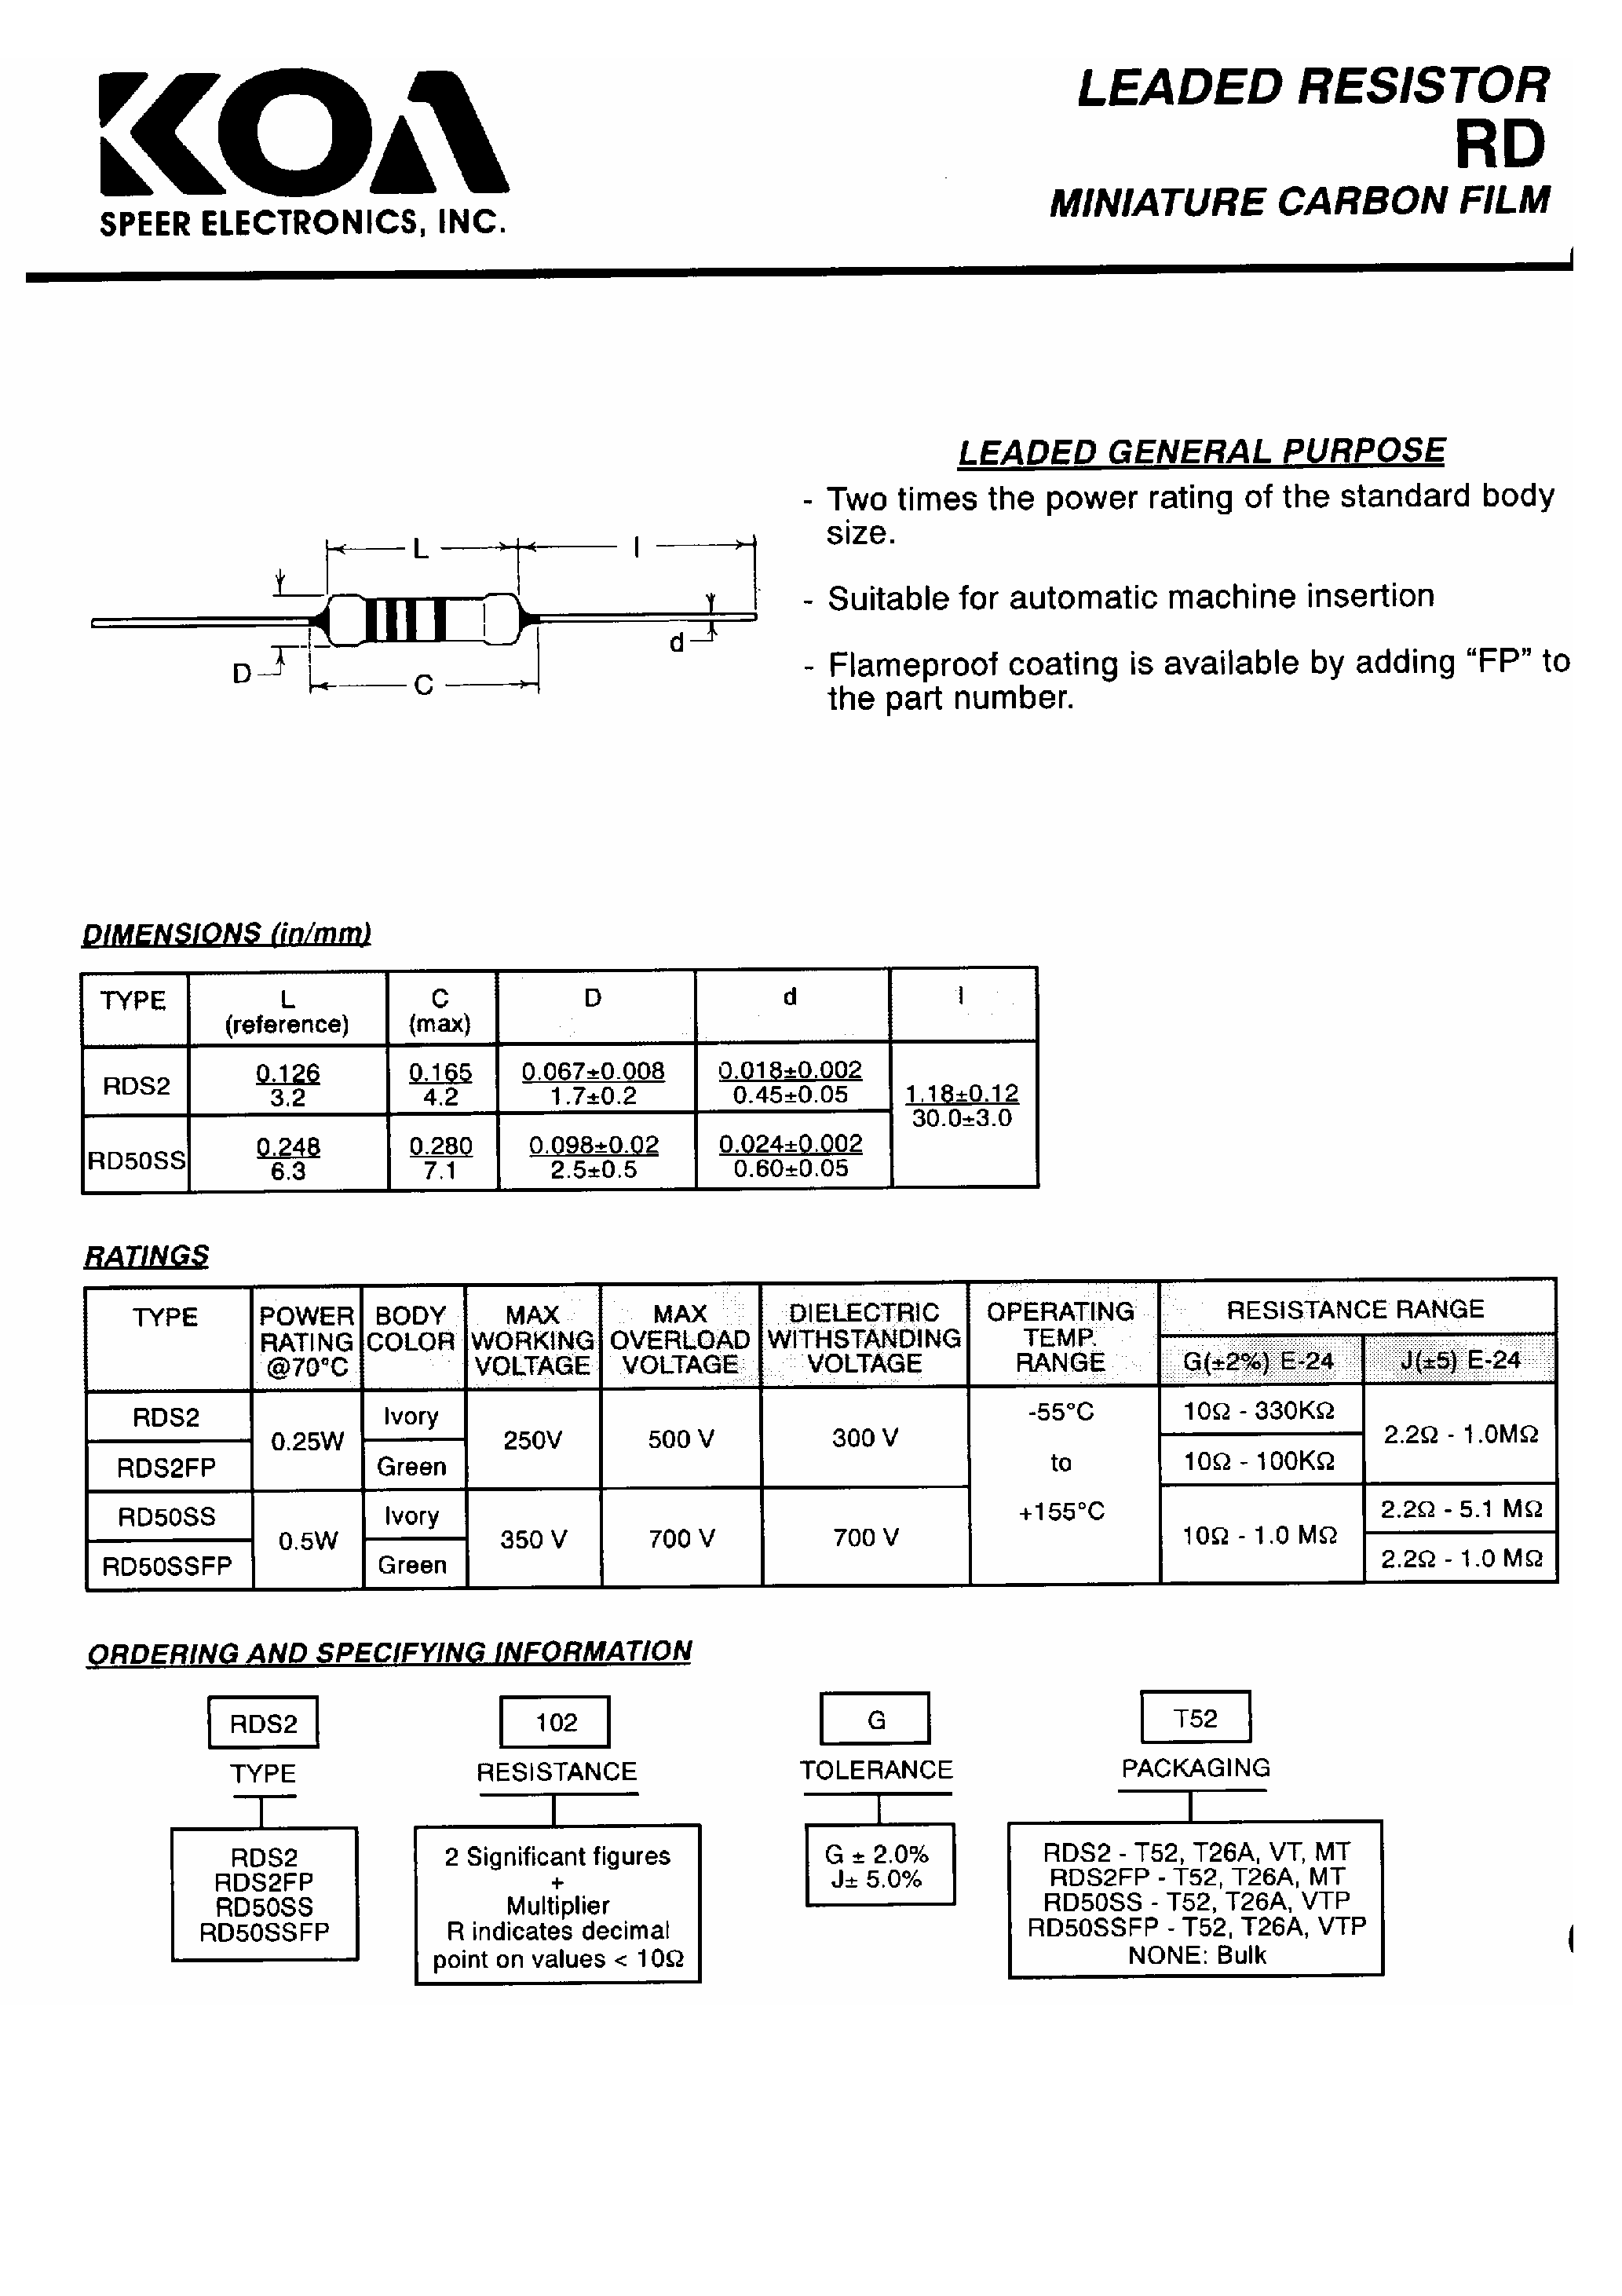 Datasheet RDS2560G - Leaded Resister RD / Miniature Carbon Film page 1